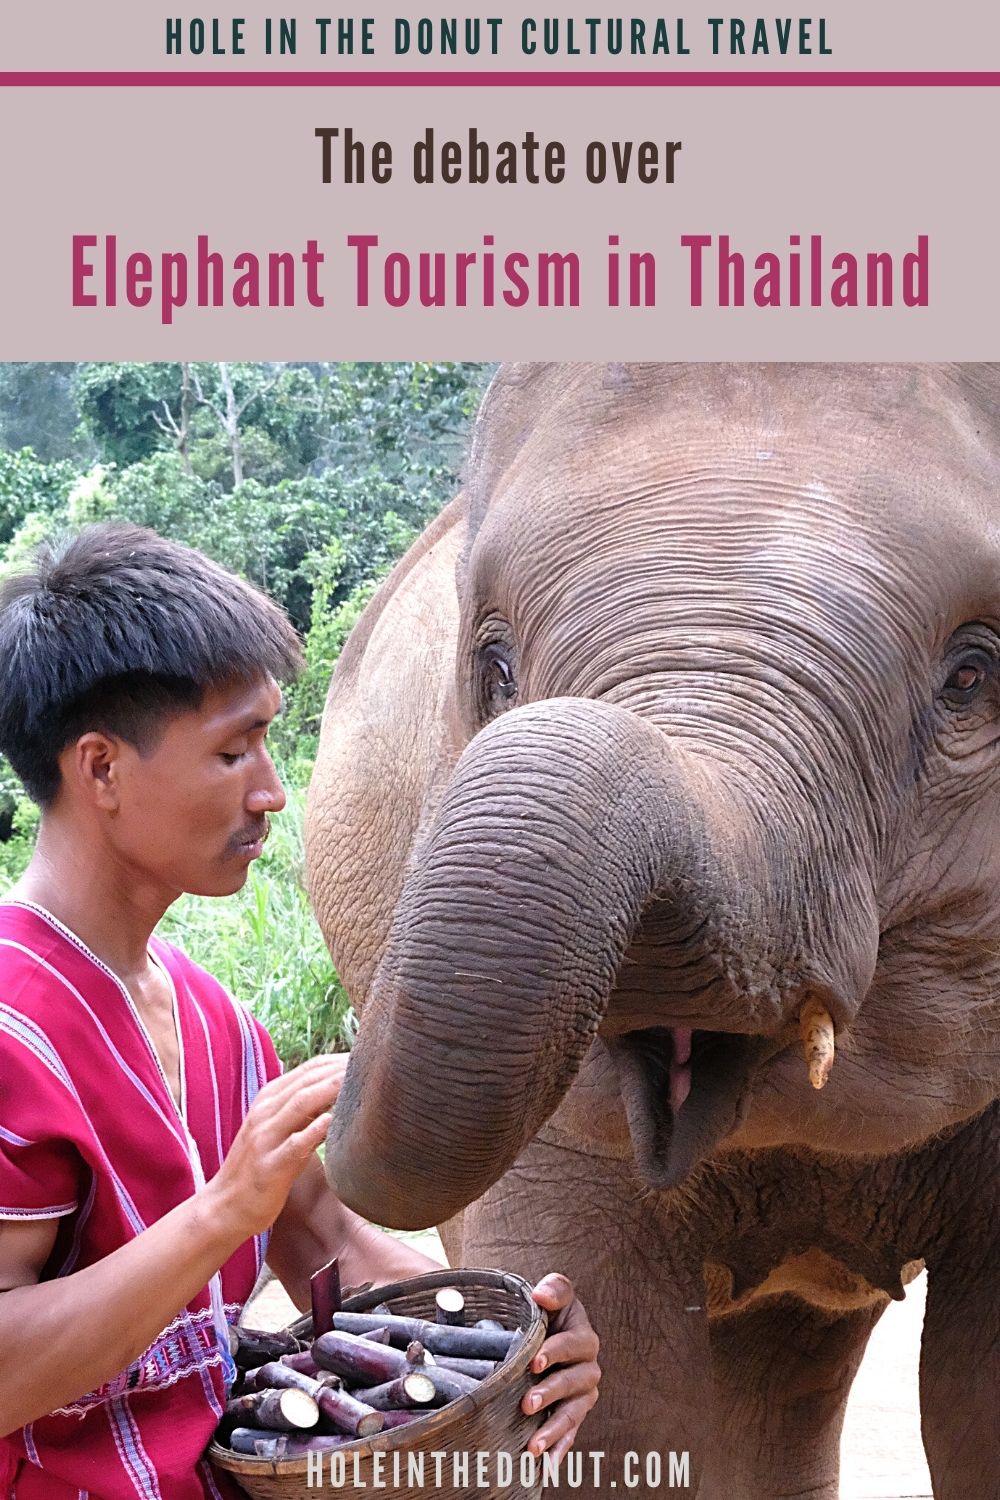 Elephant Tourism - To Ride or Not to Ride, That is the Question